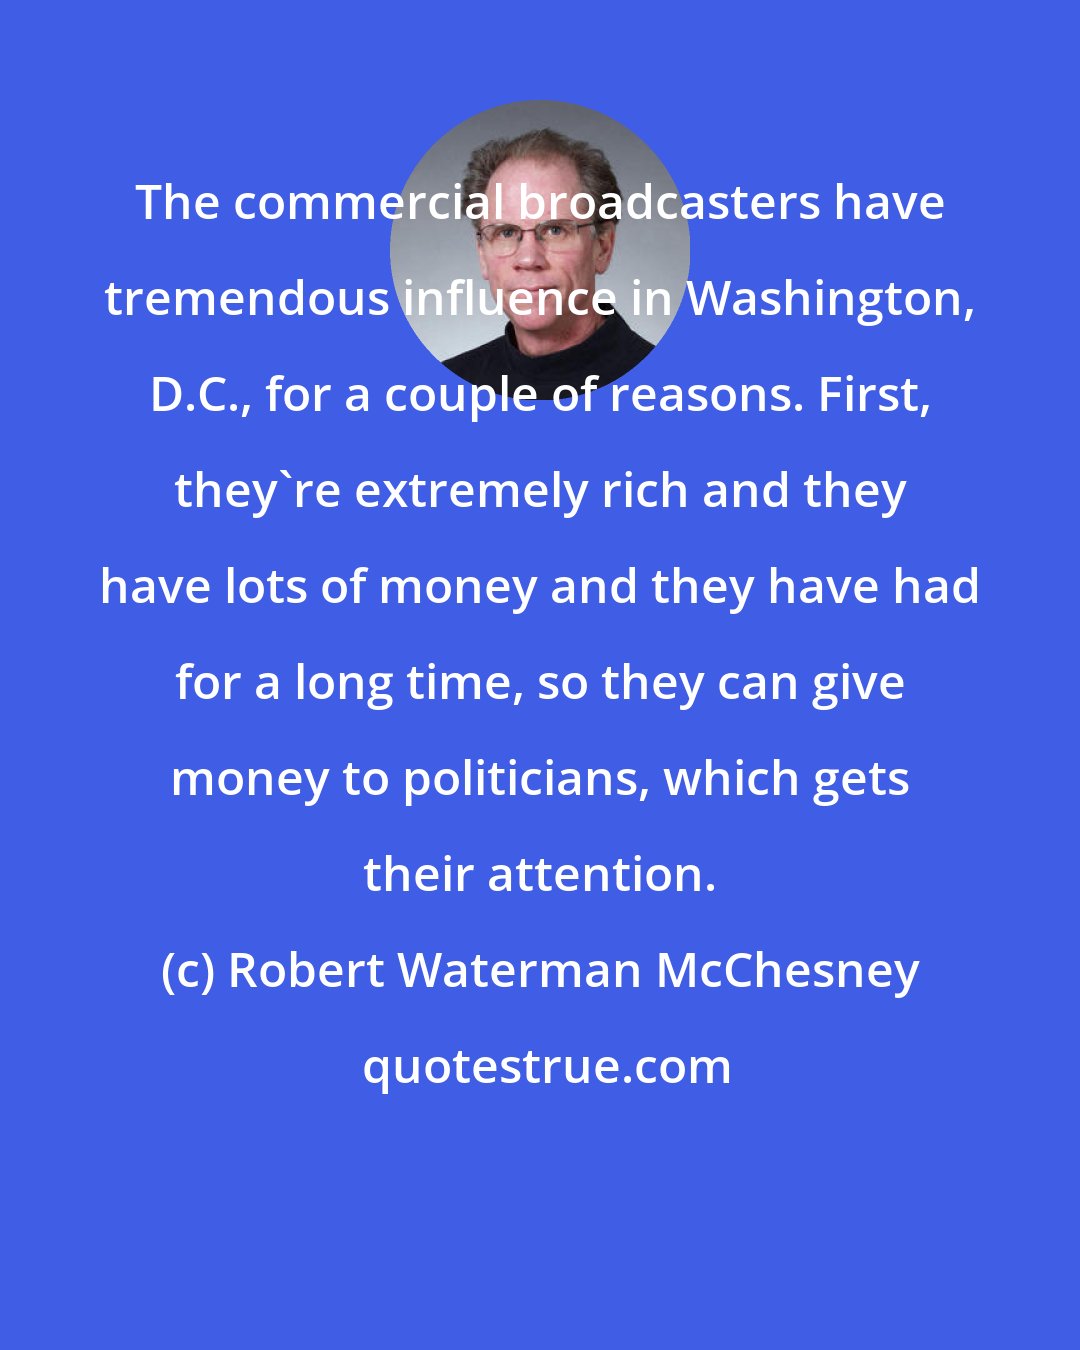 Robert Waterman McChesney: The commercial broadcasters have tremendous influence in Washington, D.C., for a couple of reasons. First, they're extremely rich and they have lots of money and they have had for a long time, so they can give money to politicians, which gets their attention.